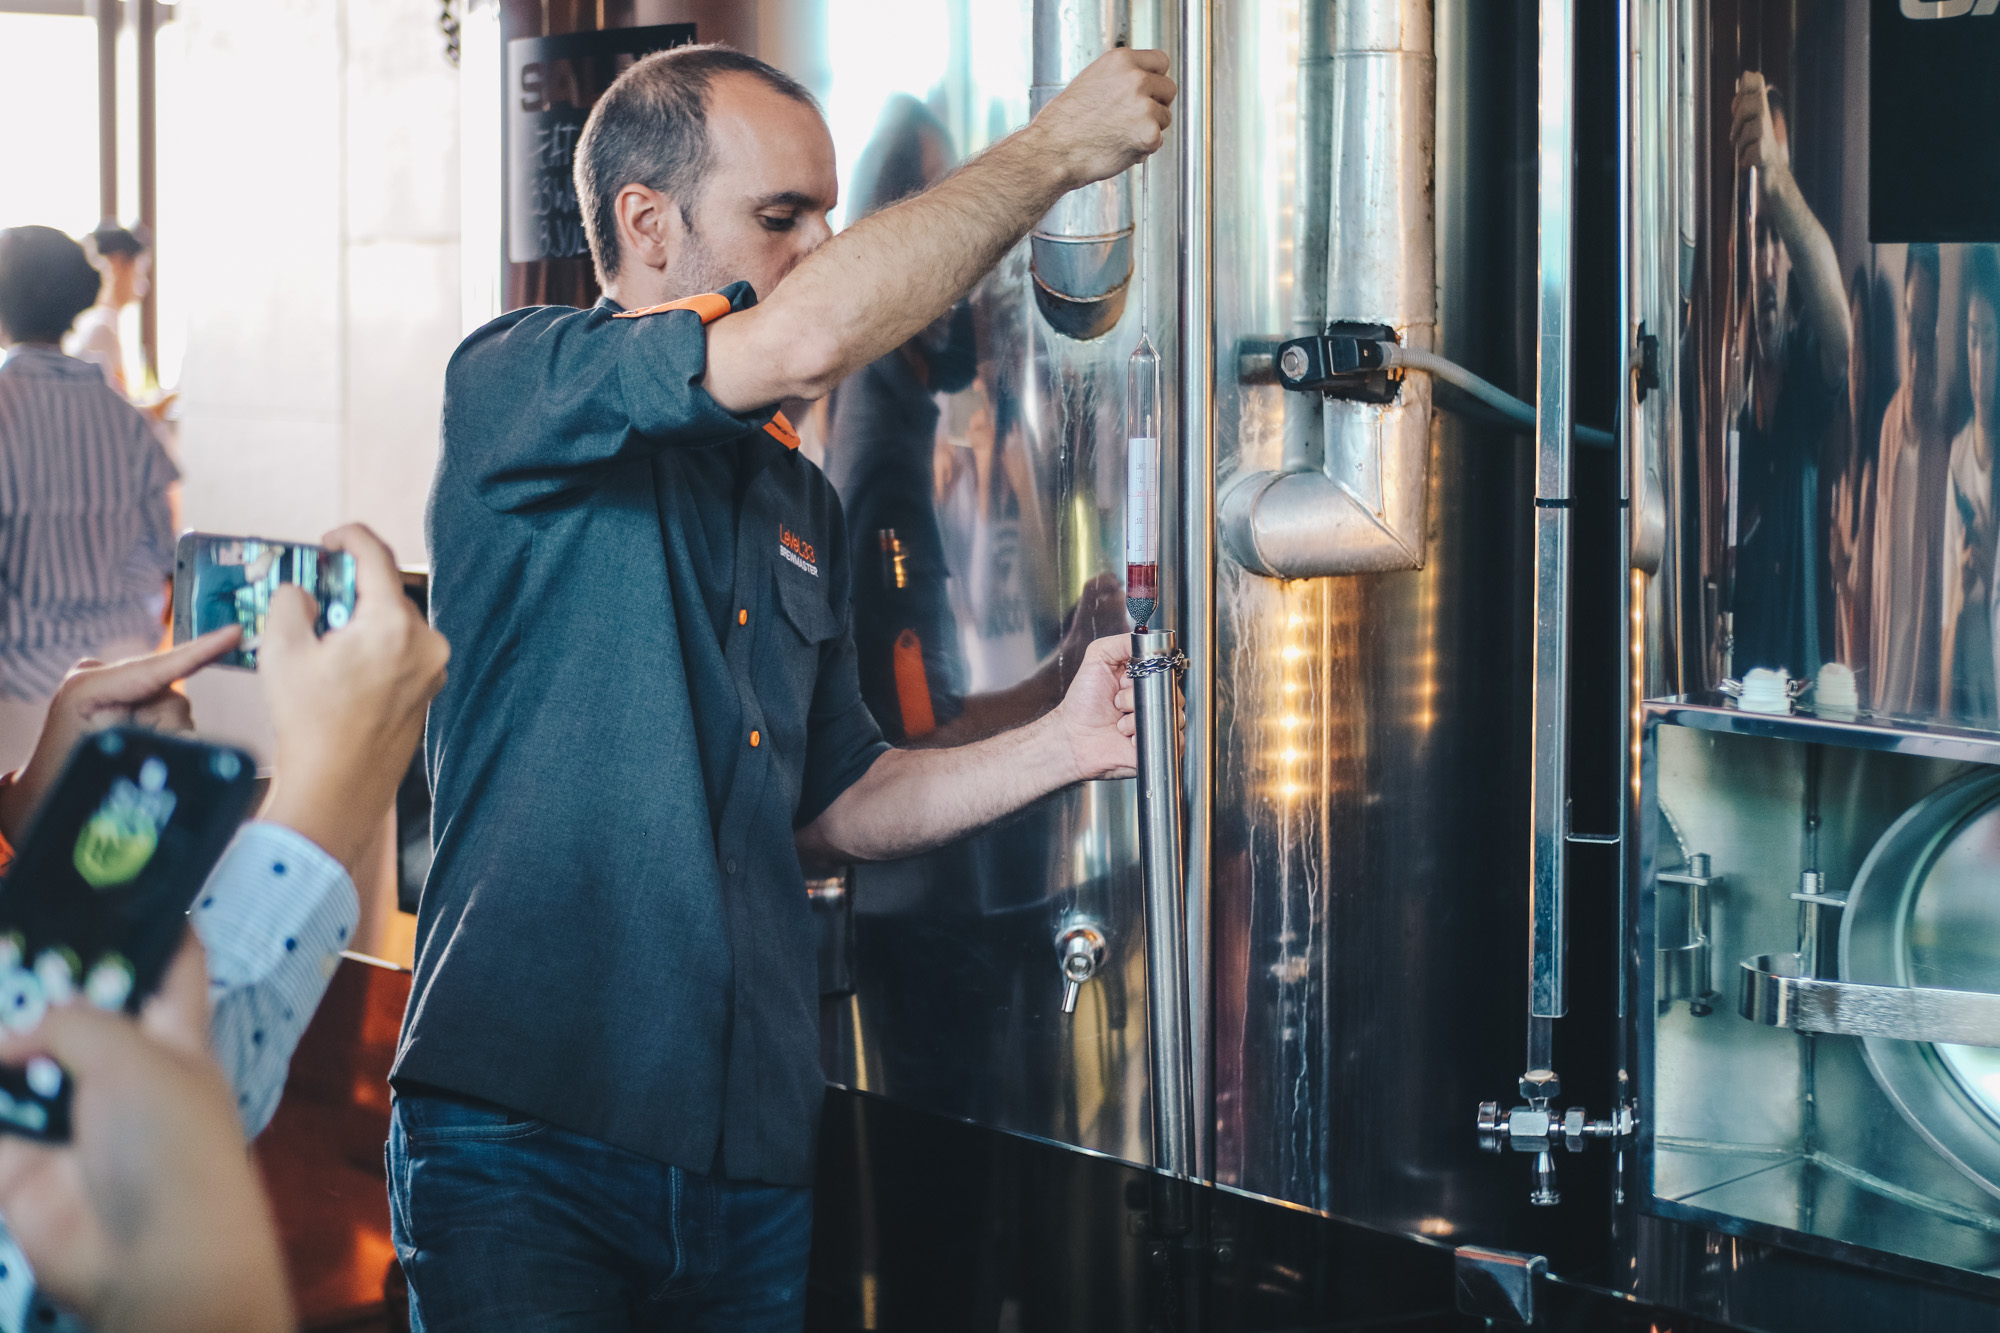 Experience The Craft Beer Scene With LeVeL33’s Brewery Tour